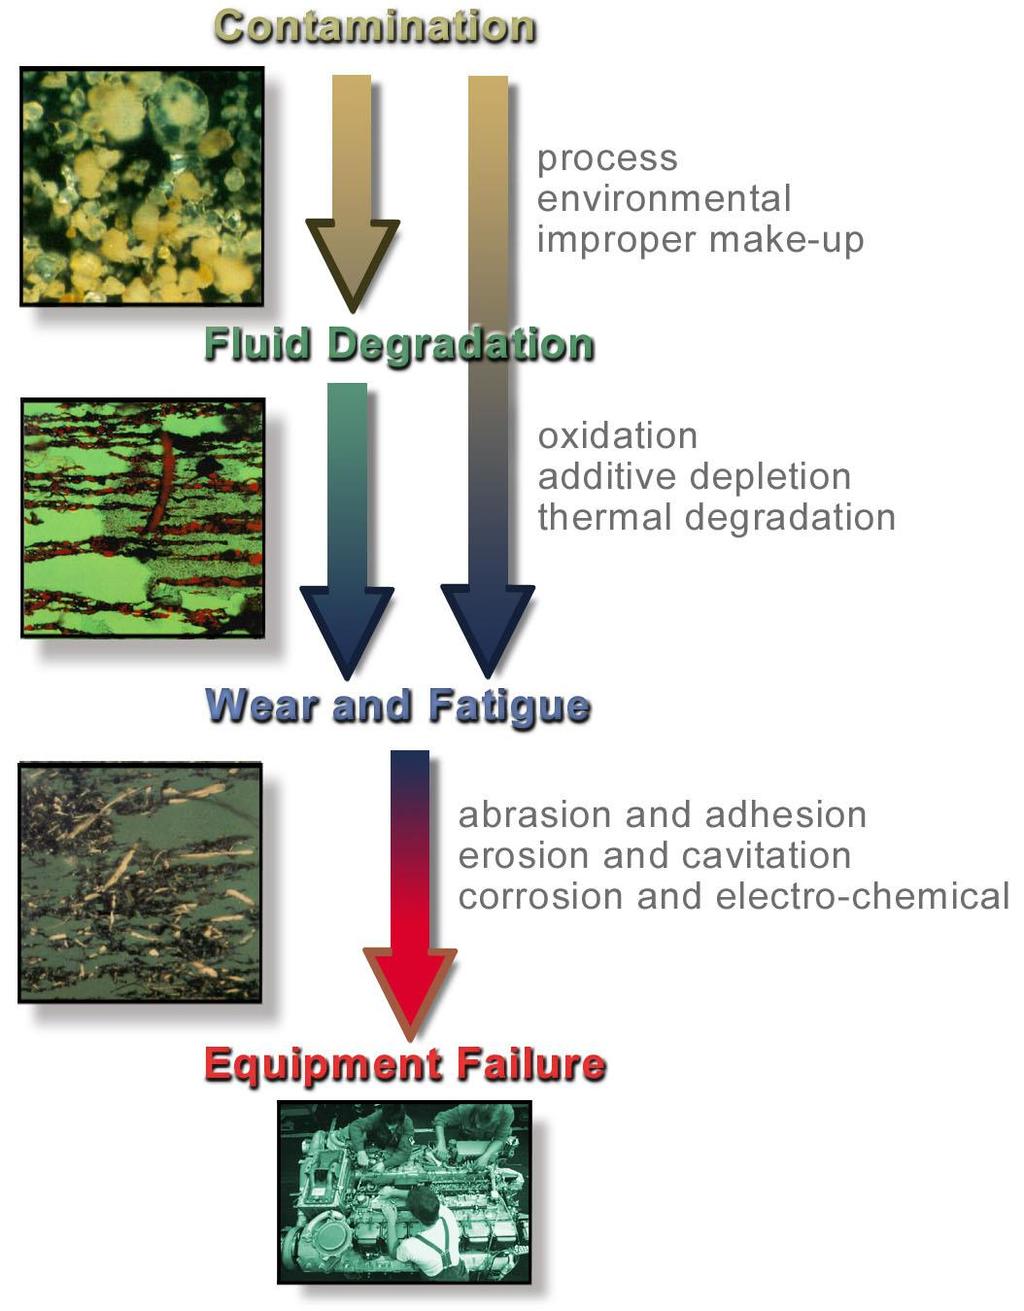 Equipment Failure Cycle Ingress of contaminants and other oil contamination increases rate of fluid degradation. Contamination and poor fluid quality cause increased wear.